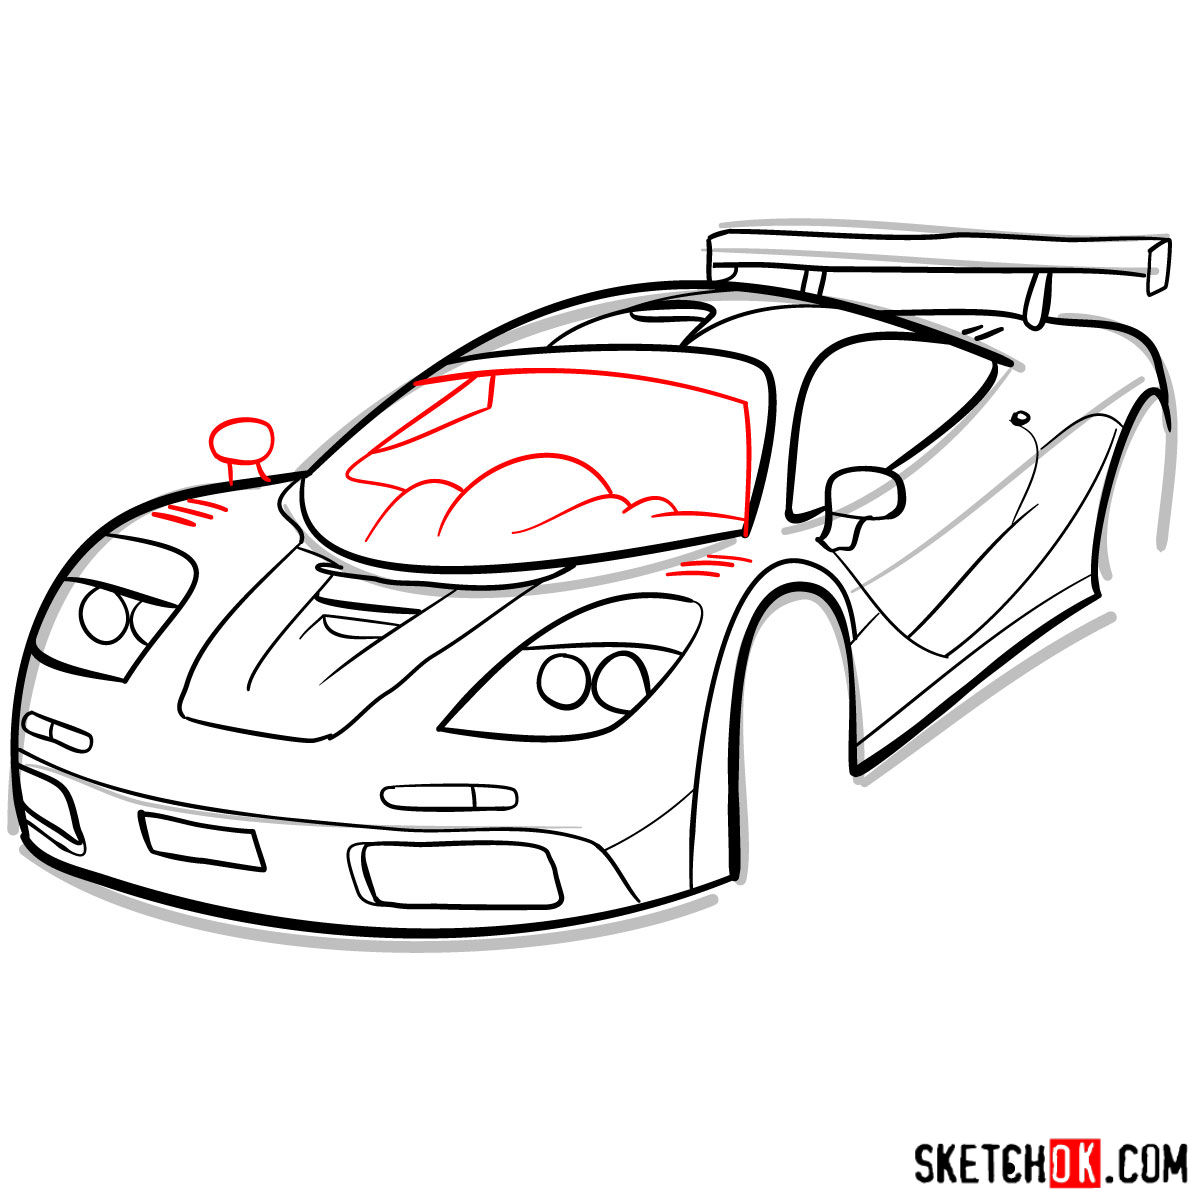 McLaren F1 - step by step drawing guide - step 10